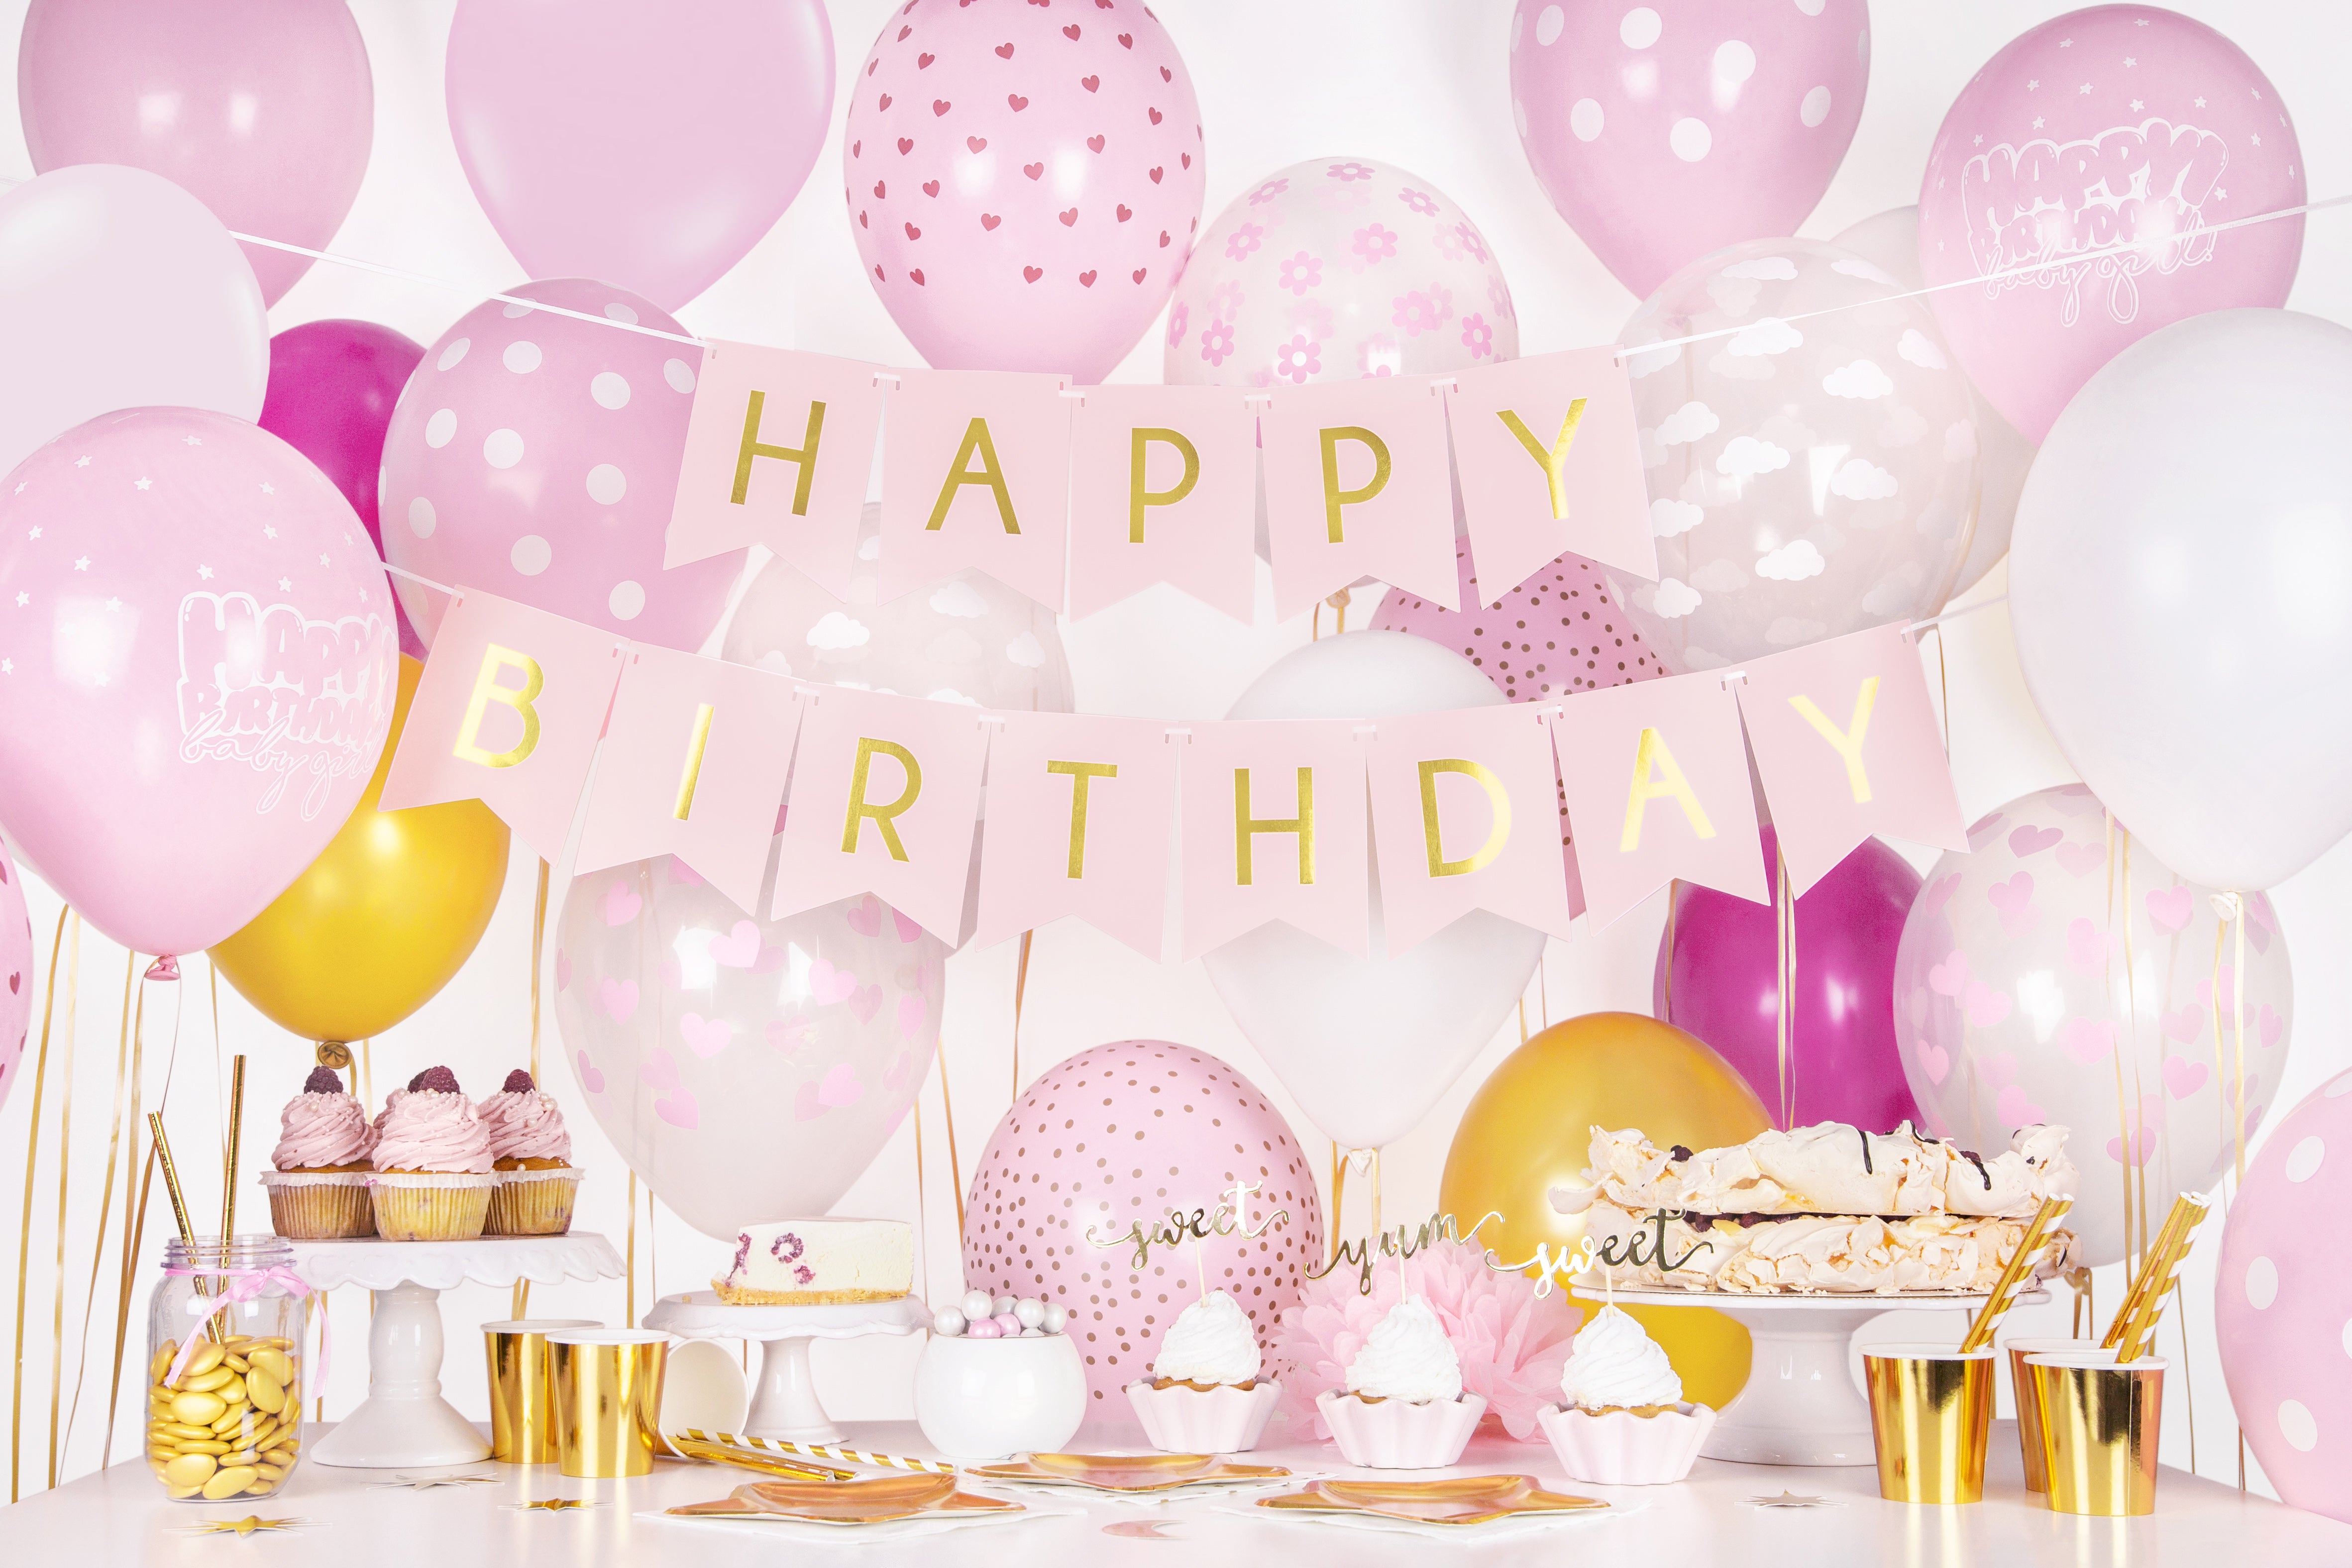 Baby Pink Pastel Balloons with Dots for birthday party